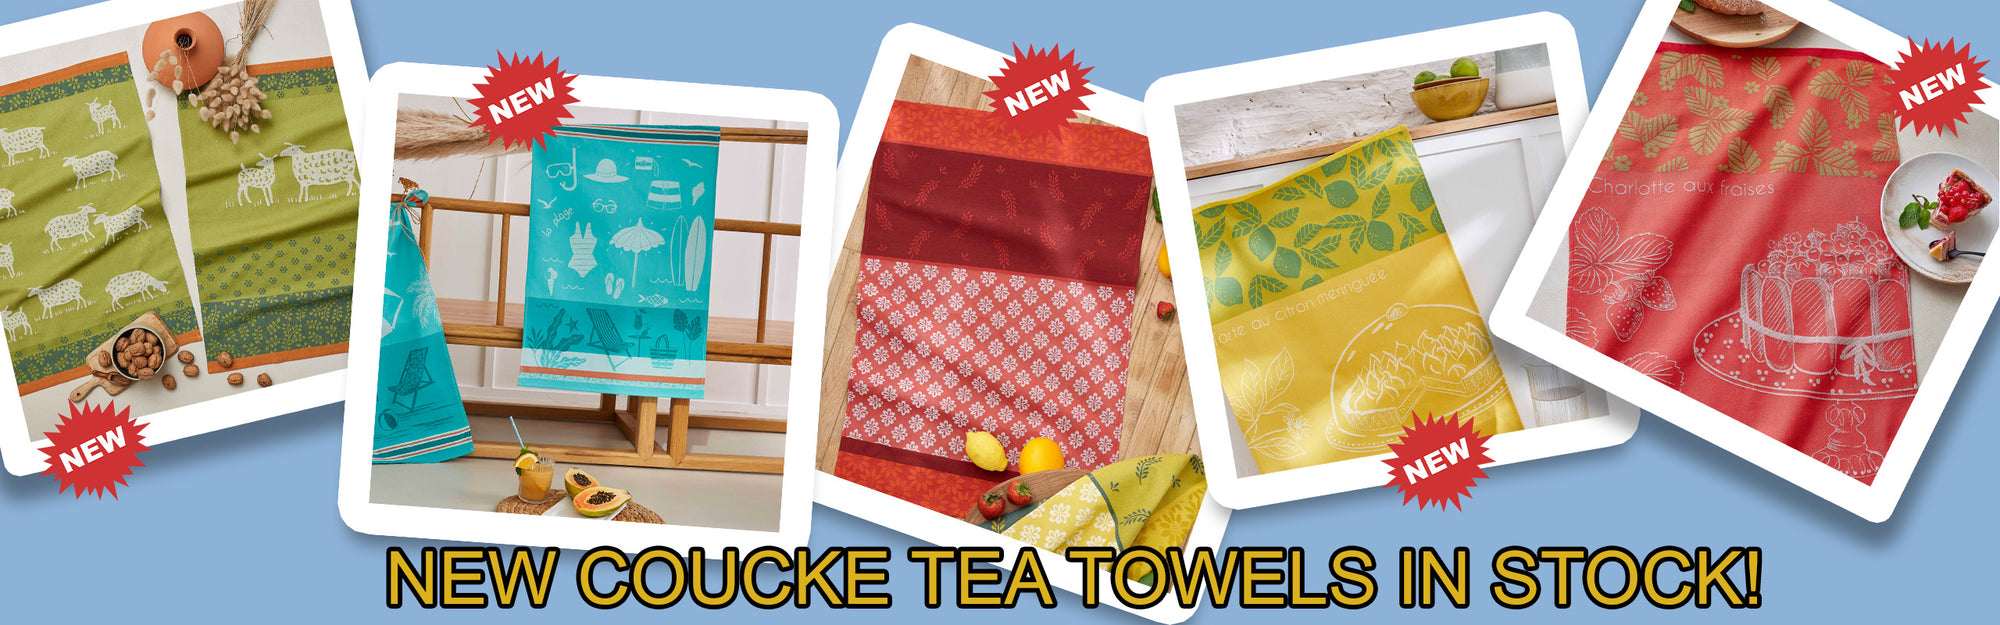 New Coucke towels are now in stock!